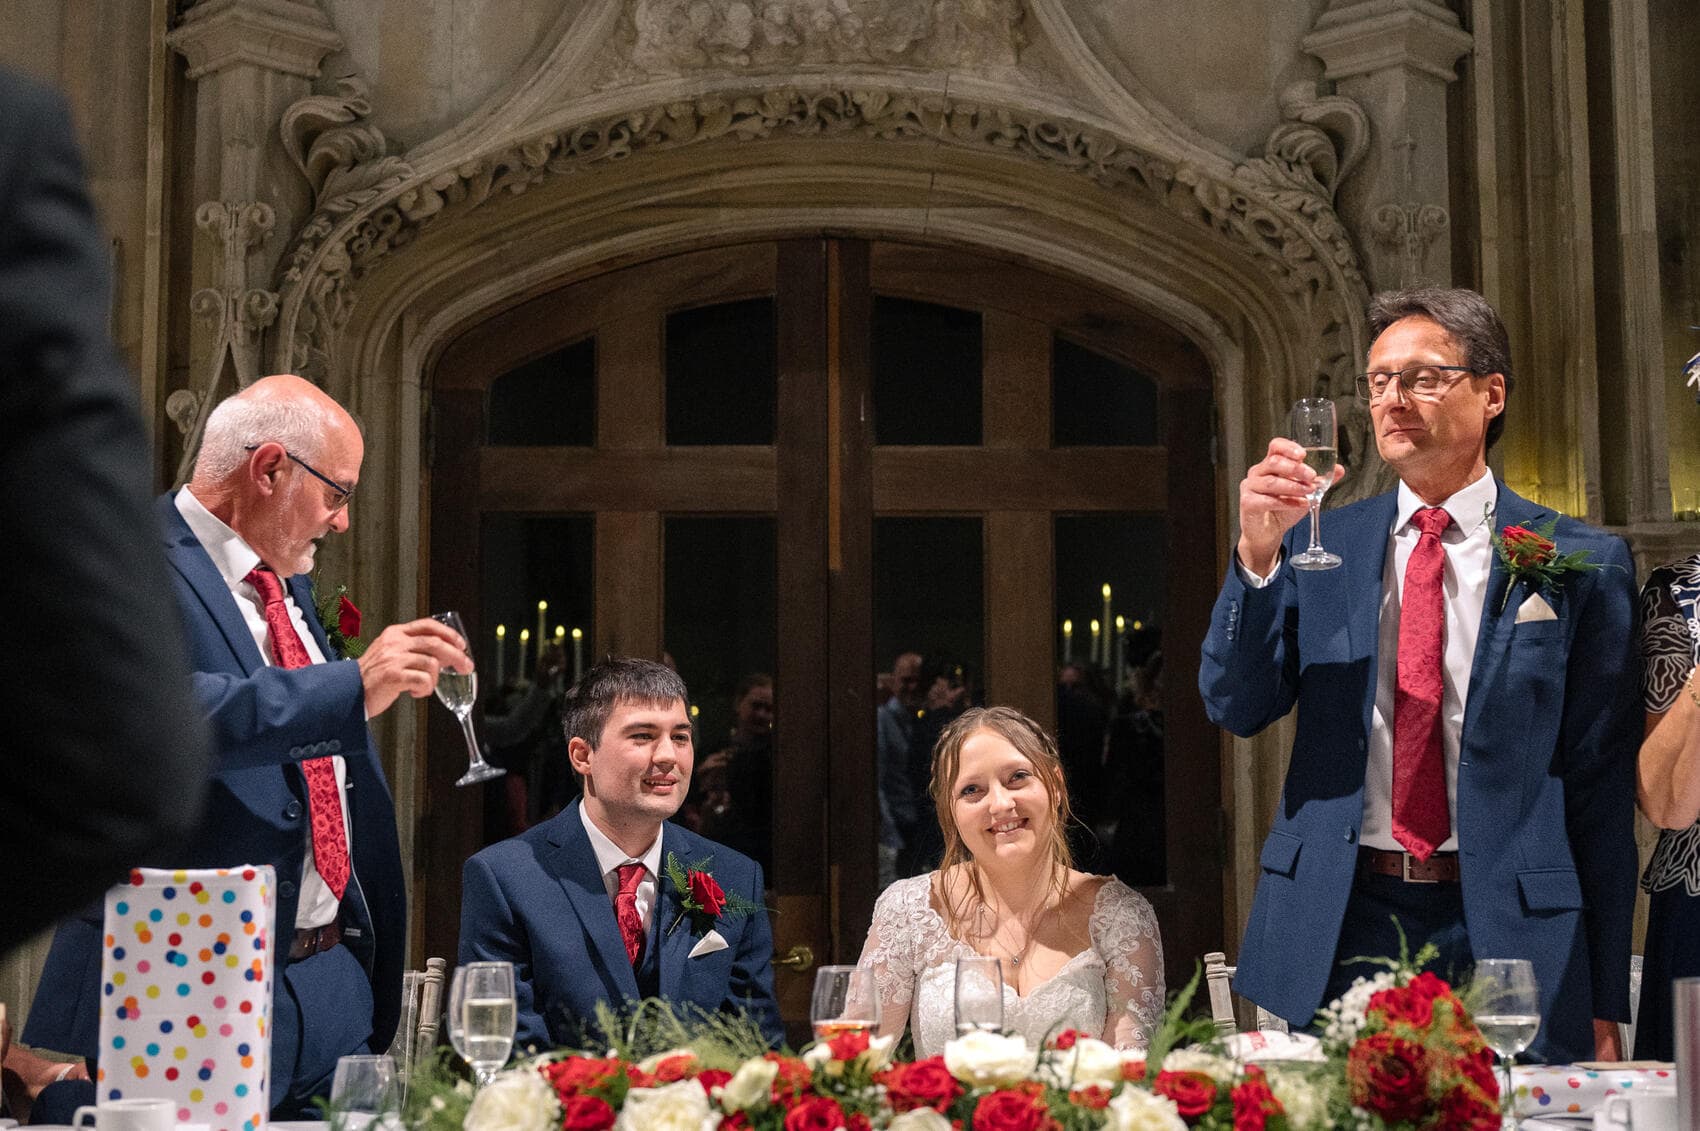 The fathers toast the happy couple at Highcliffe castle wedding